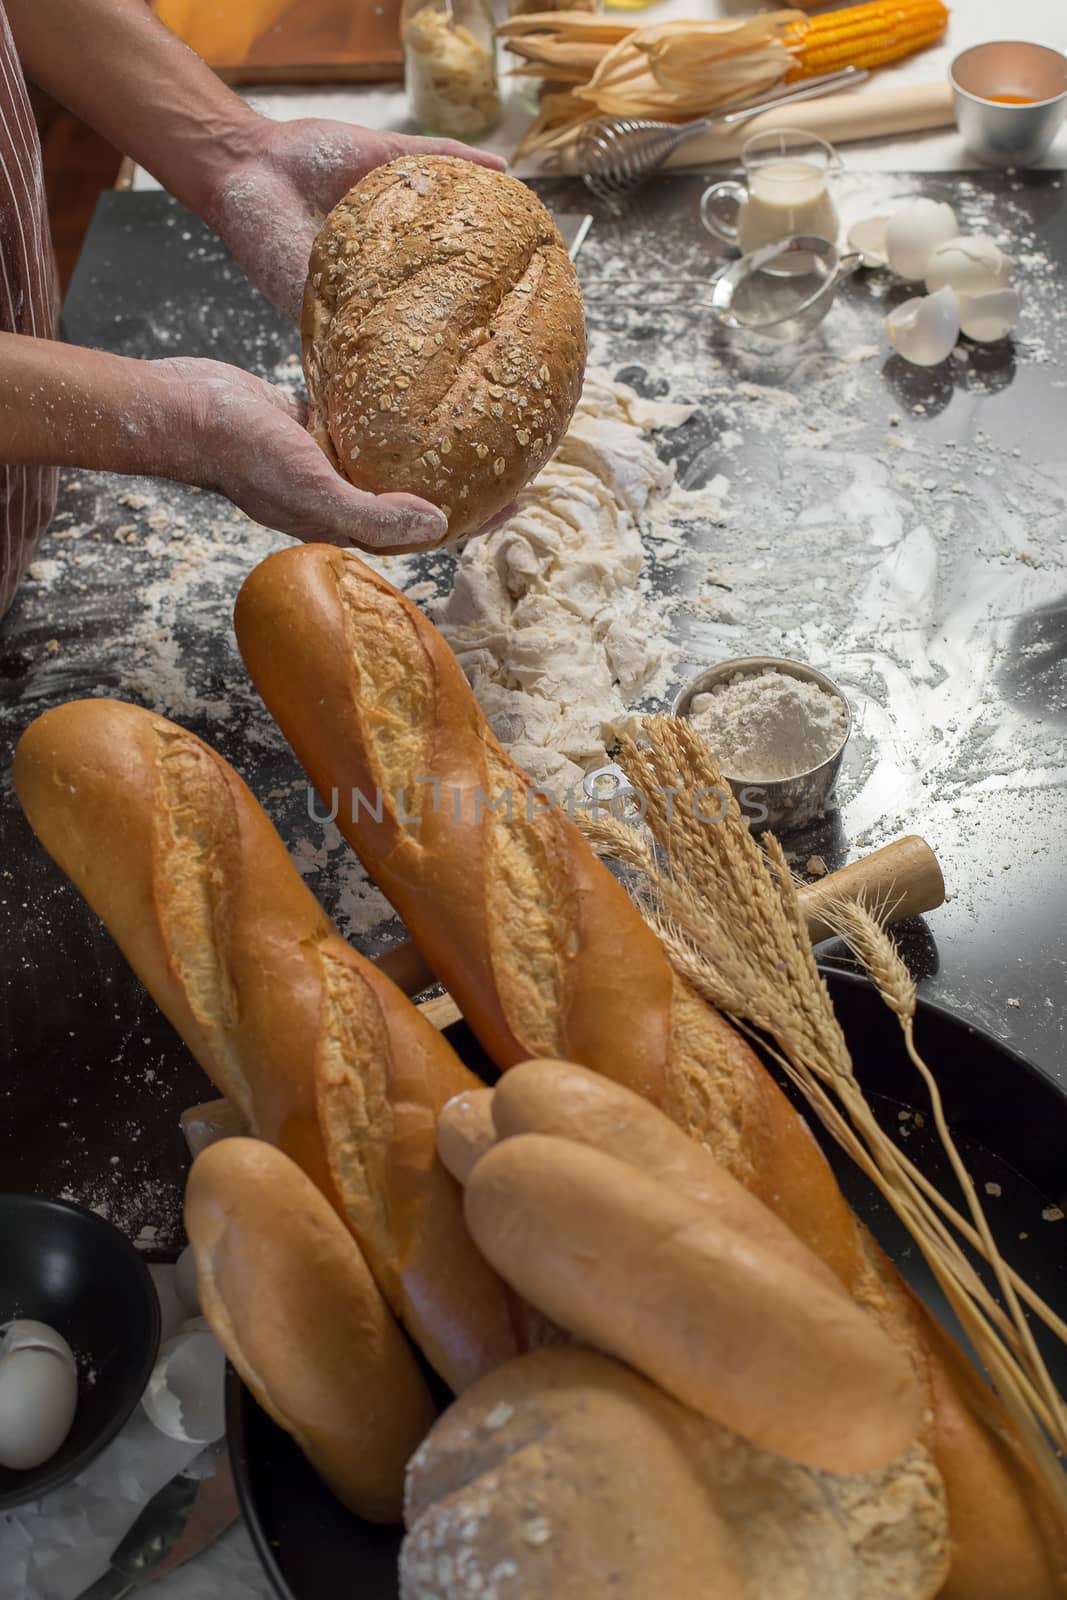 Chef holds the fresh bread in hand. Man preparing buns at table in kitchen.